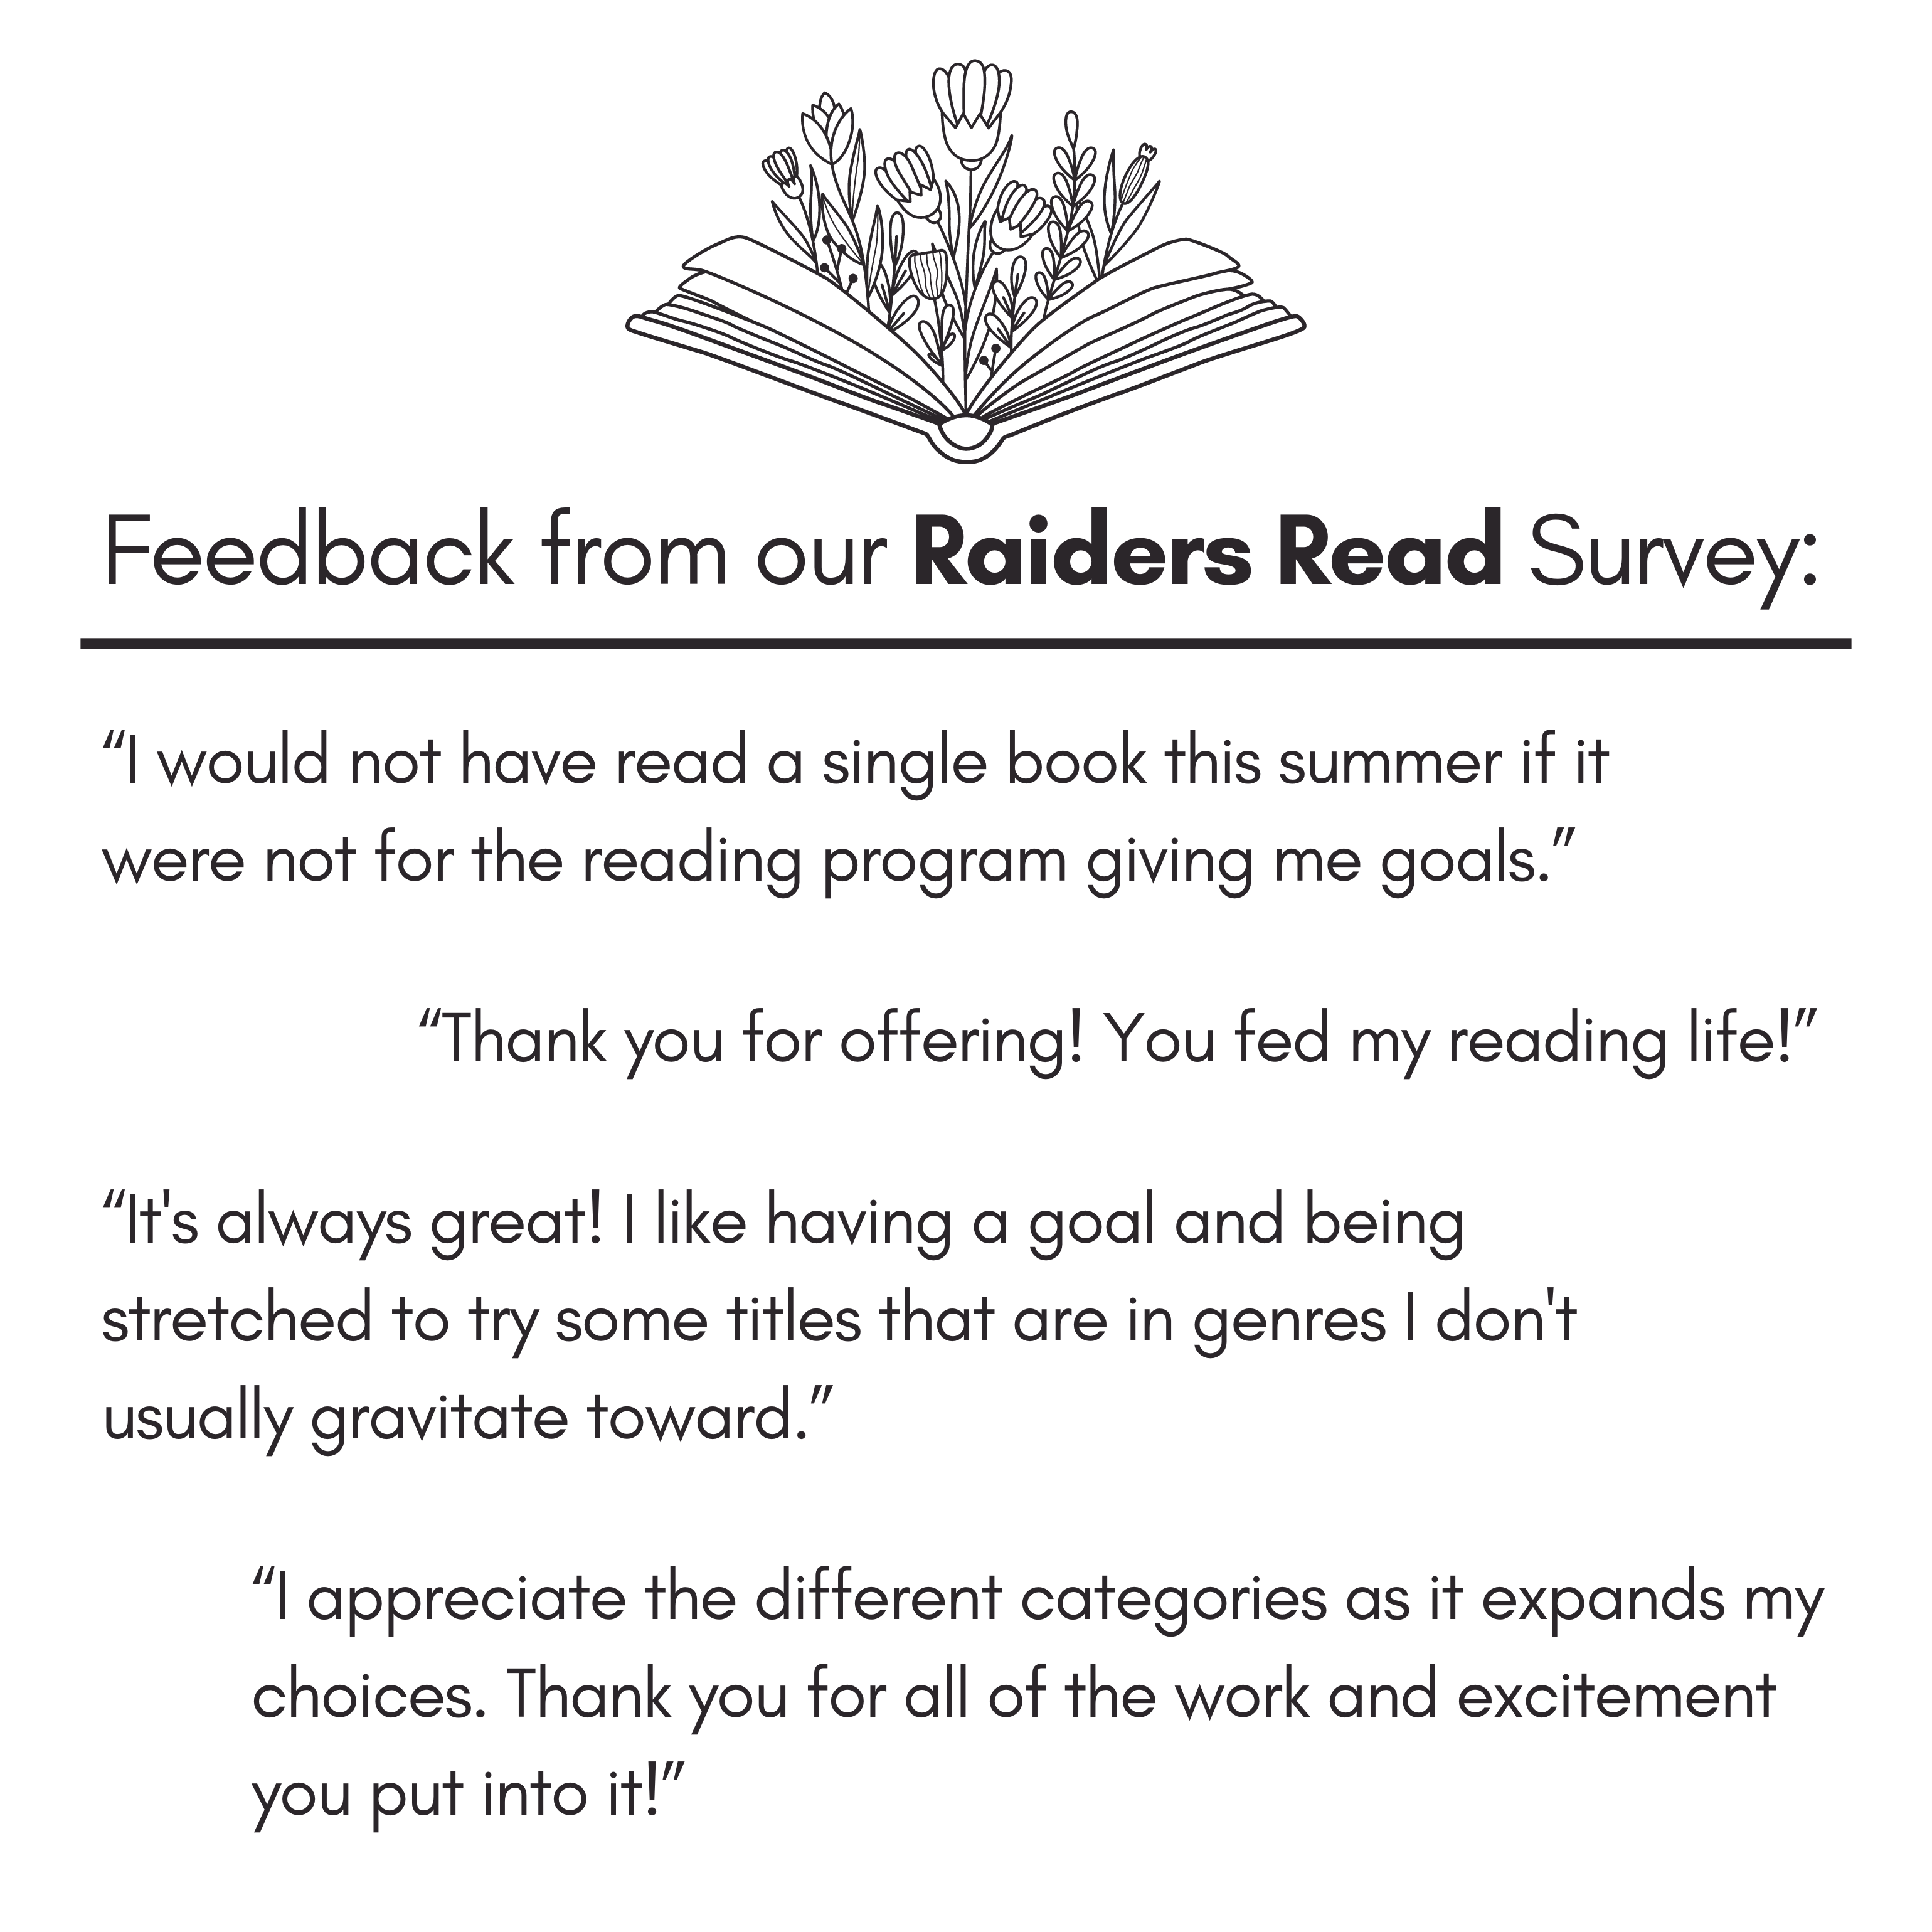 Feedback from our Raiders Read Survey: “I would not have read a single book this summer if it were not for the reading program giving me goals.”; “Thank you for offering! You fed my reading life!”; “It's always great! I like having a goal and being stretched to try some titles that are in genres I don't usually gravitate toward.”; “I appreciate the different categories as it expands my choices. Thank you for all of the work and excitement you put into it!”.